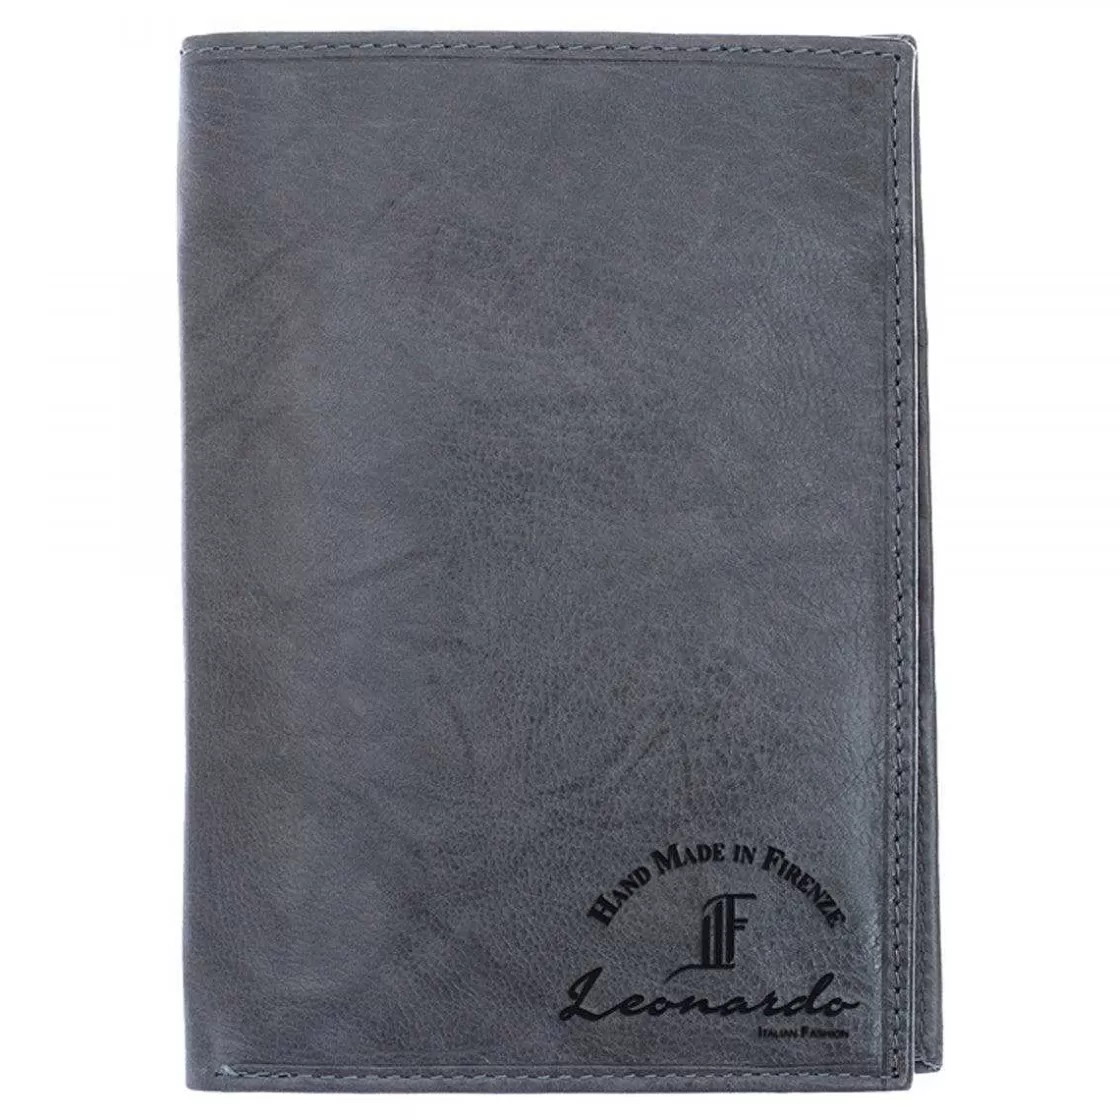 Leonardo Sauvage Men'S Wallet In Blue Calf Leather For Banknote Cards And Side Flap Fashion